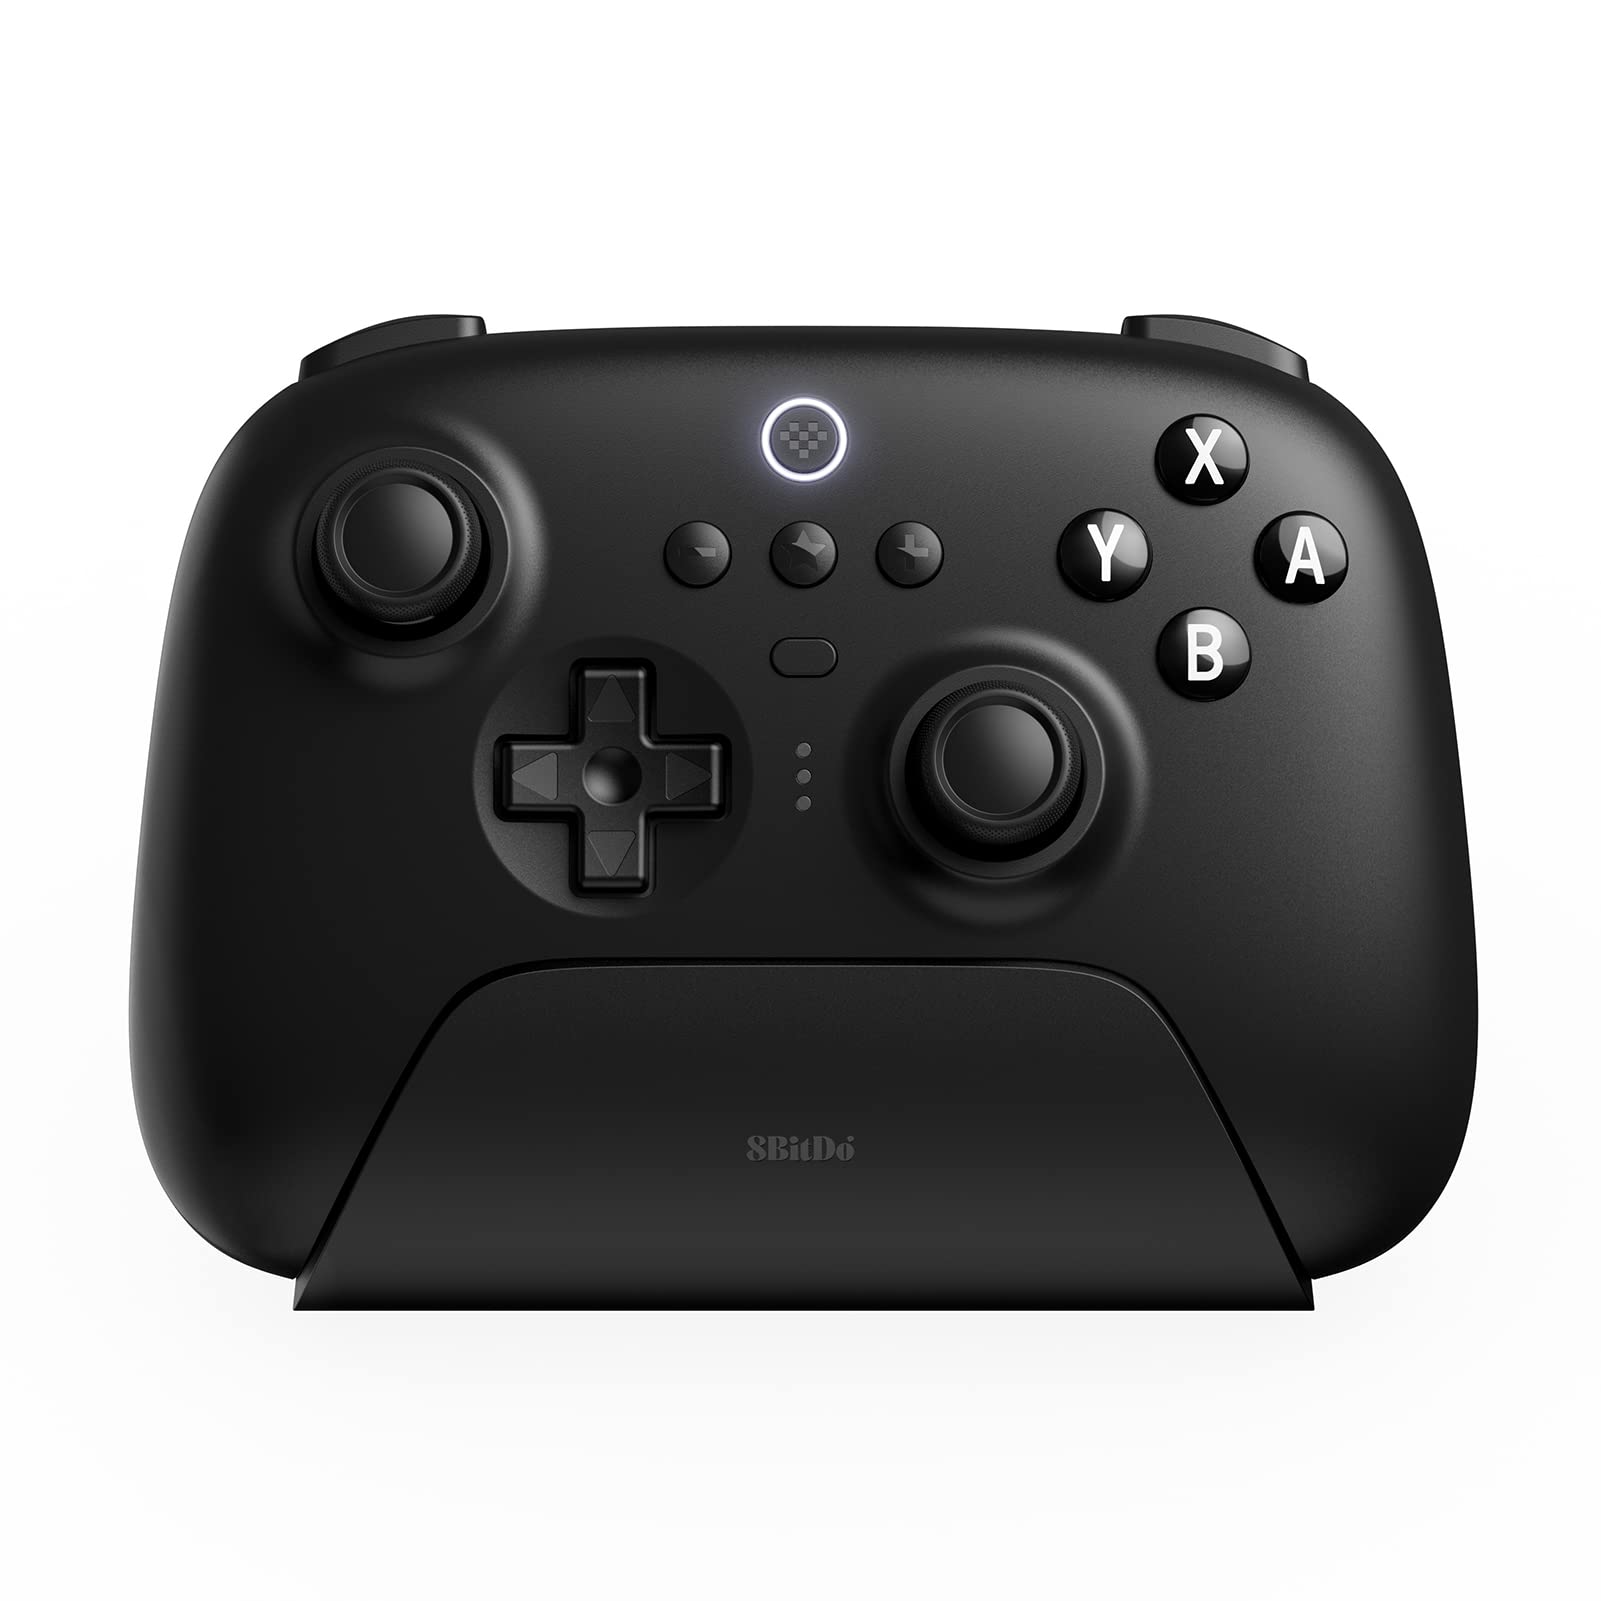 Find your controller in the list of devices and select it.
Choose Forget Device to remove the controller from the Bluetooth settings.